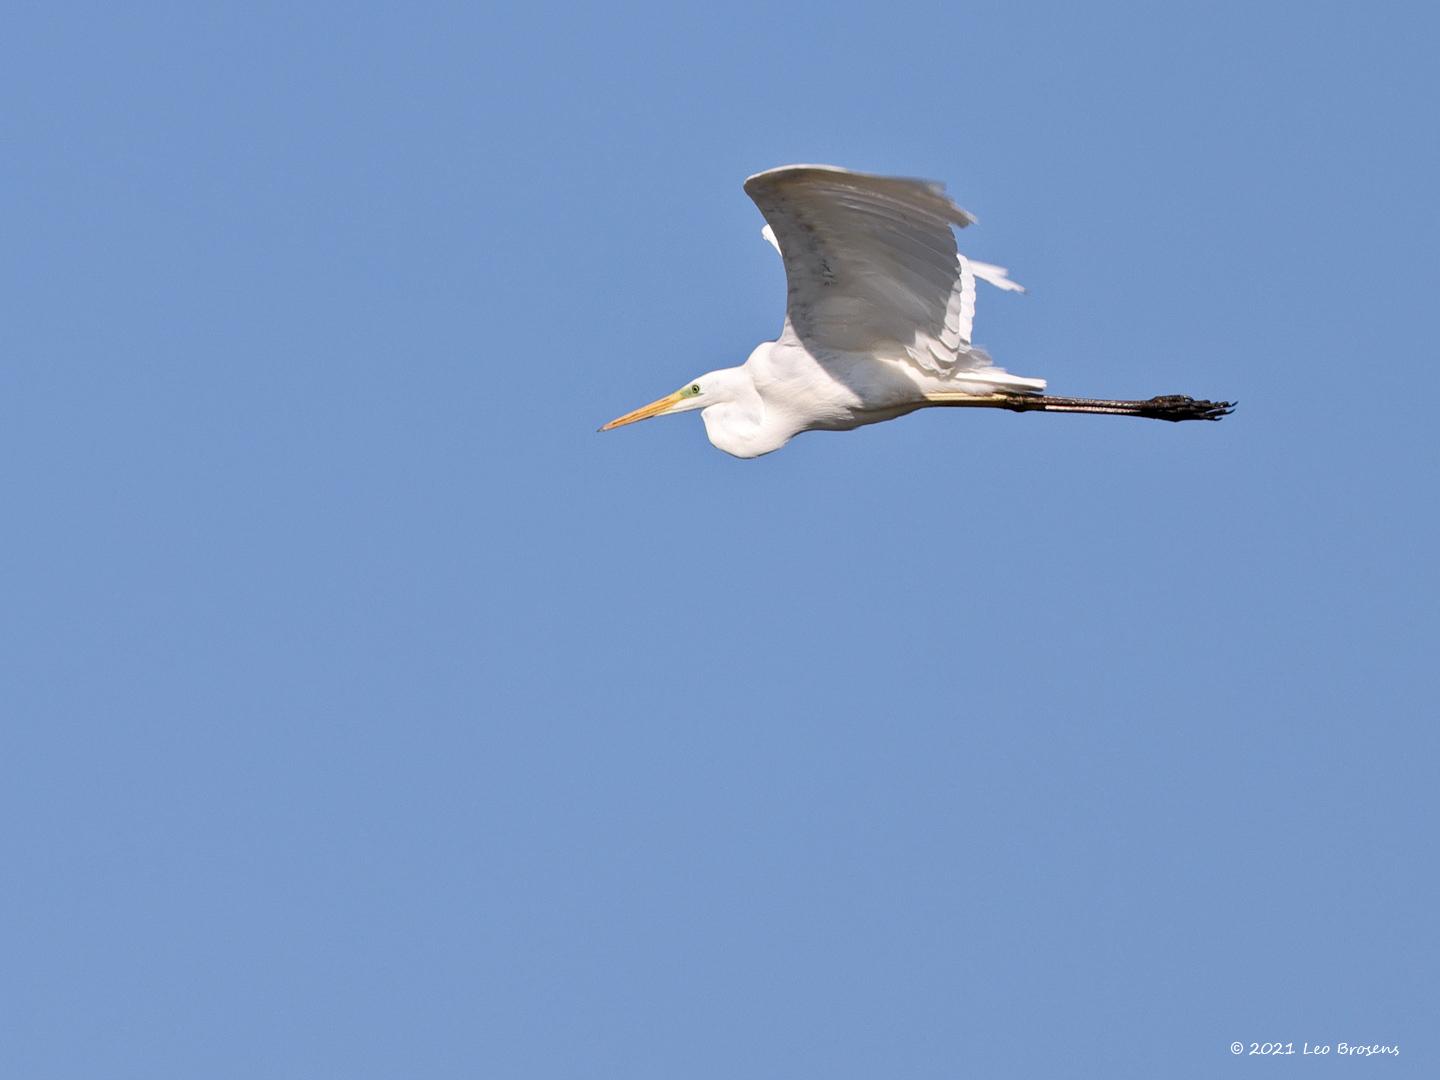 Grote-zilverreiger-20210531g14401A1A8327acrfb.jpg